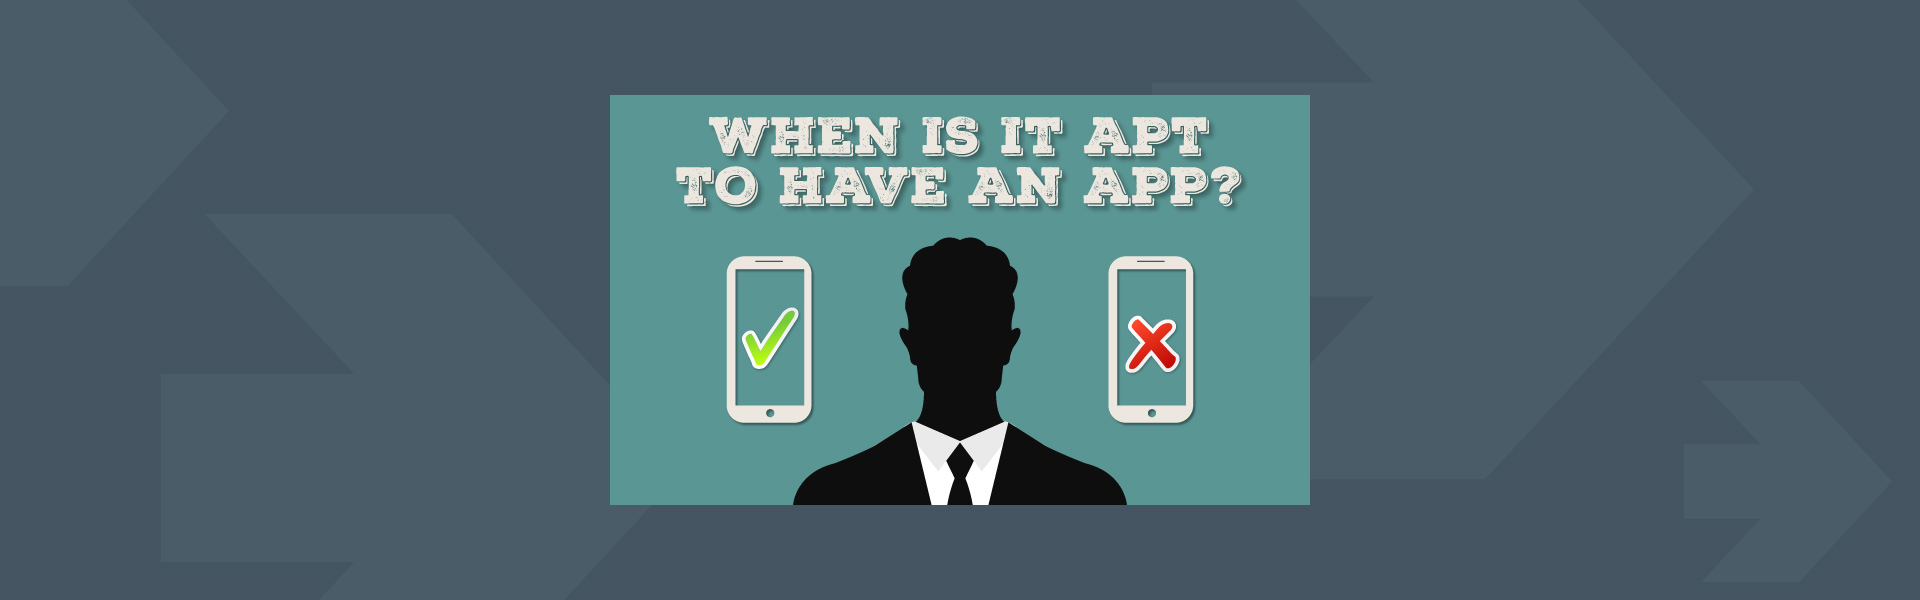 Apt to have an app?